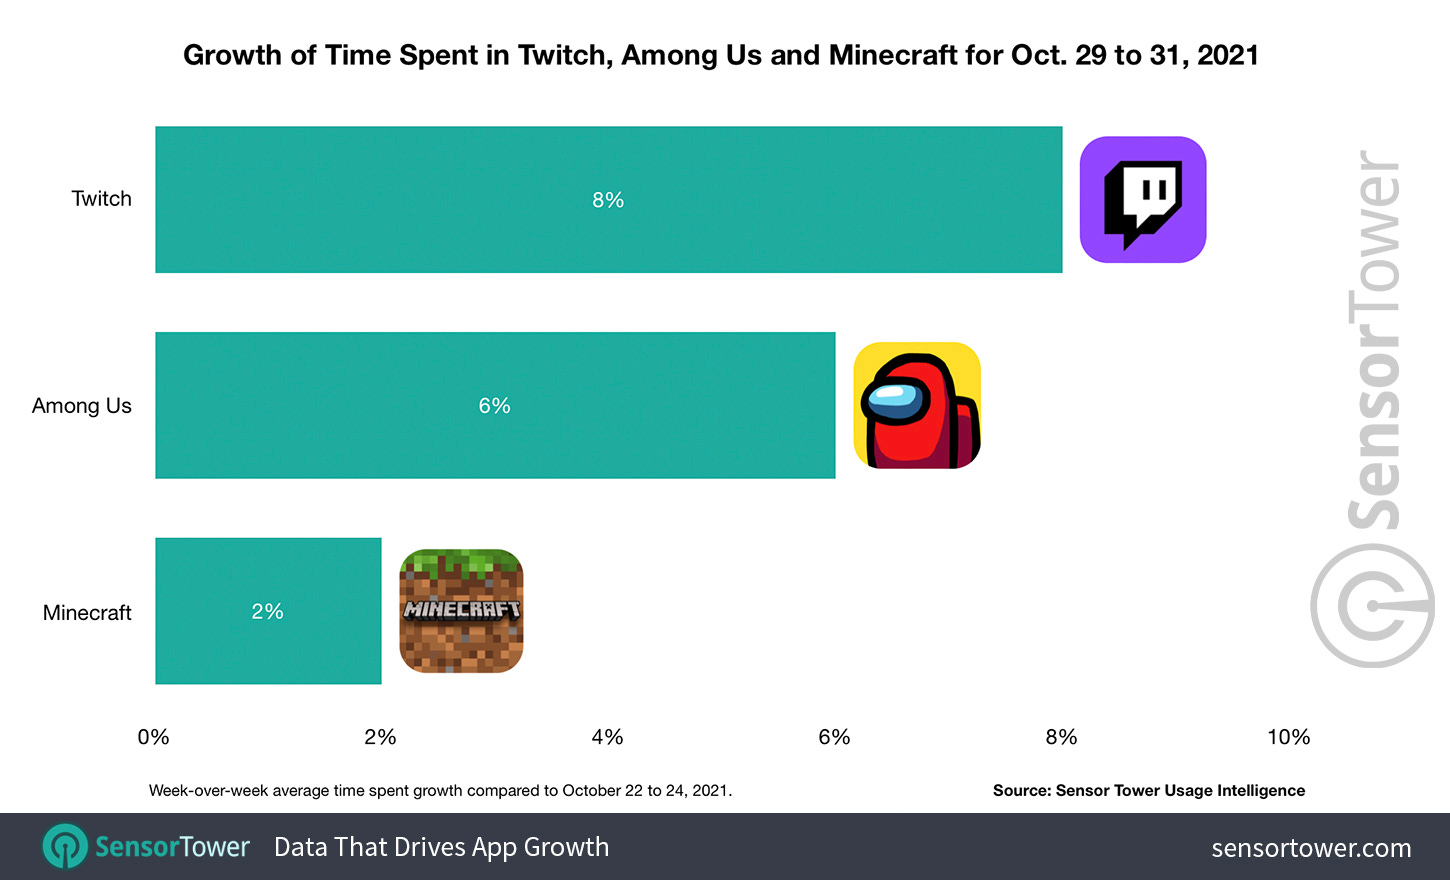 Growth of Time Spent in Twitch, Among Us and Minecraft for October 29 to 31, 2021